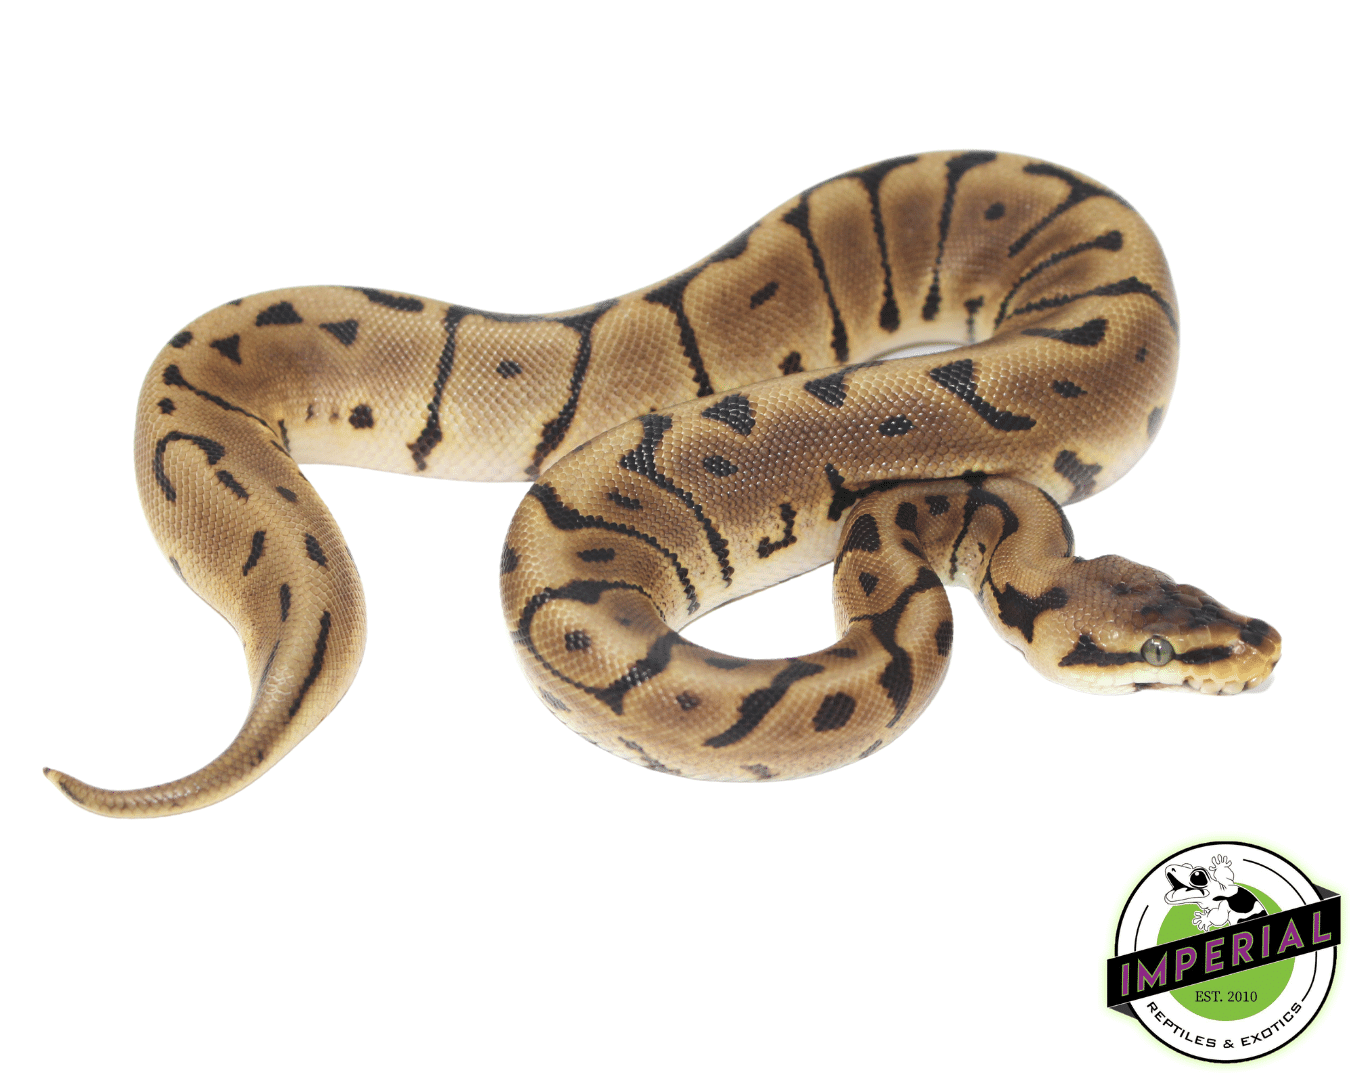 leopard spider ball python for sale, buy reptiles online